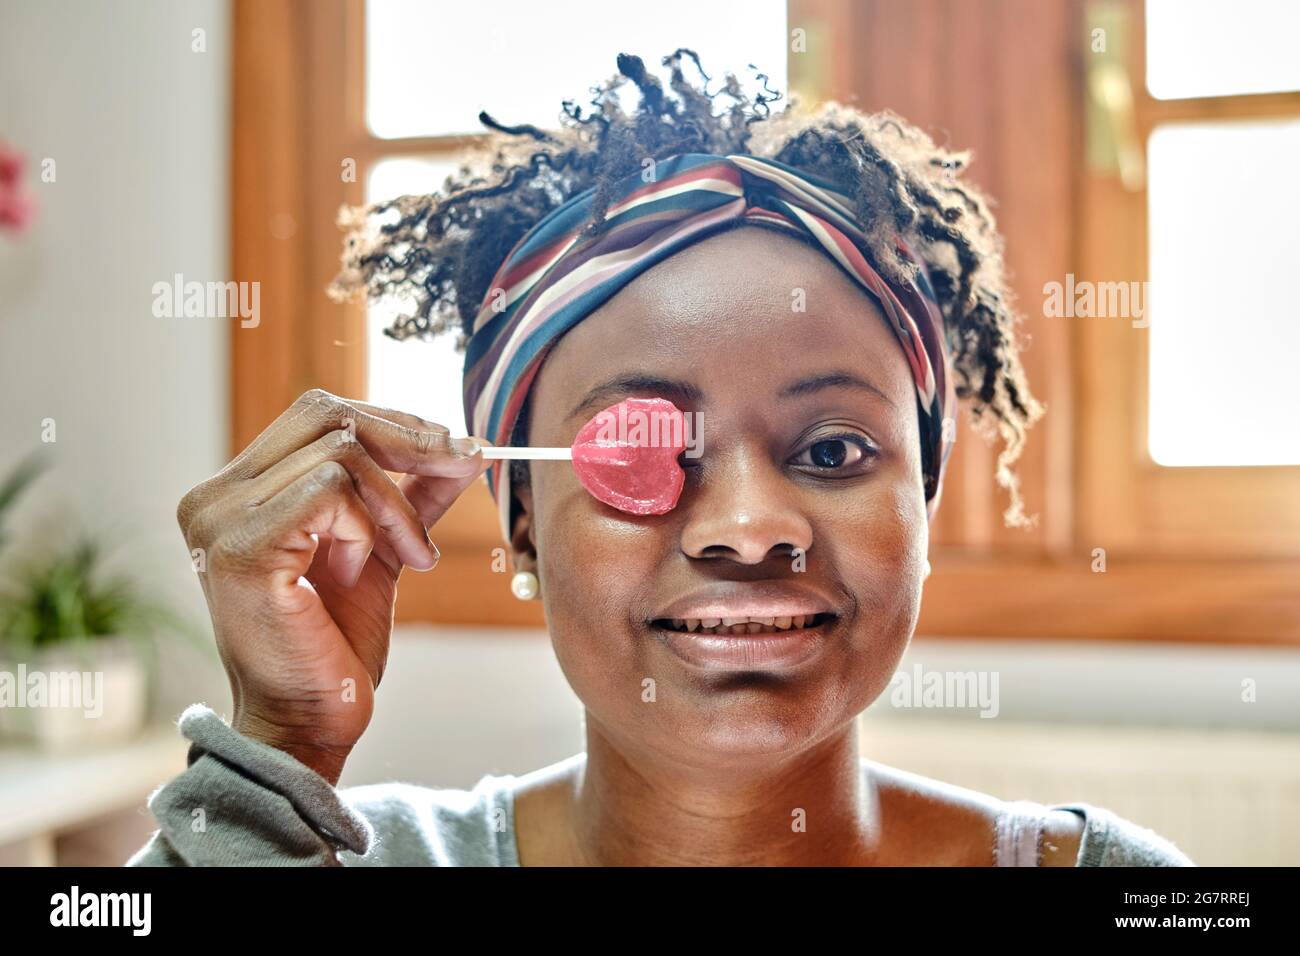 Closeup funny portrait of a young black woman with afro hairstyle joking with a lollipop indoor at home, laughing. Lifestyle concept. Stock Photo